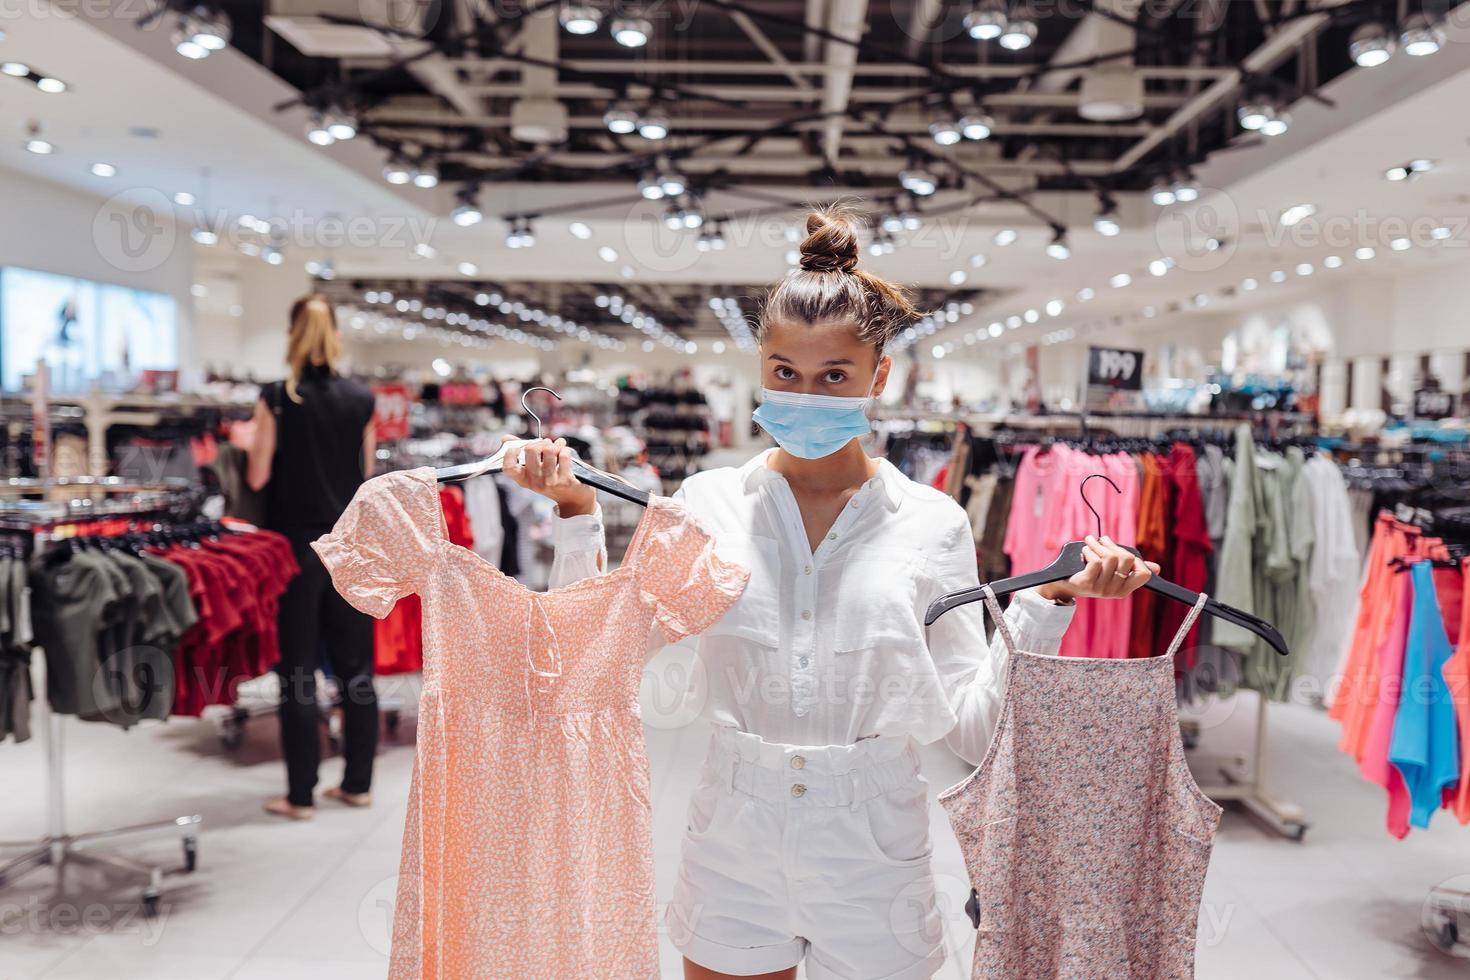 Young woman shopping apparels in clothing boutique with protective face mask photo